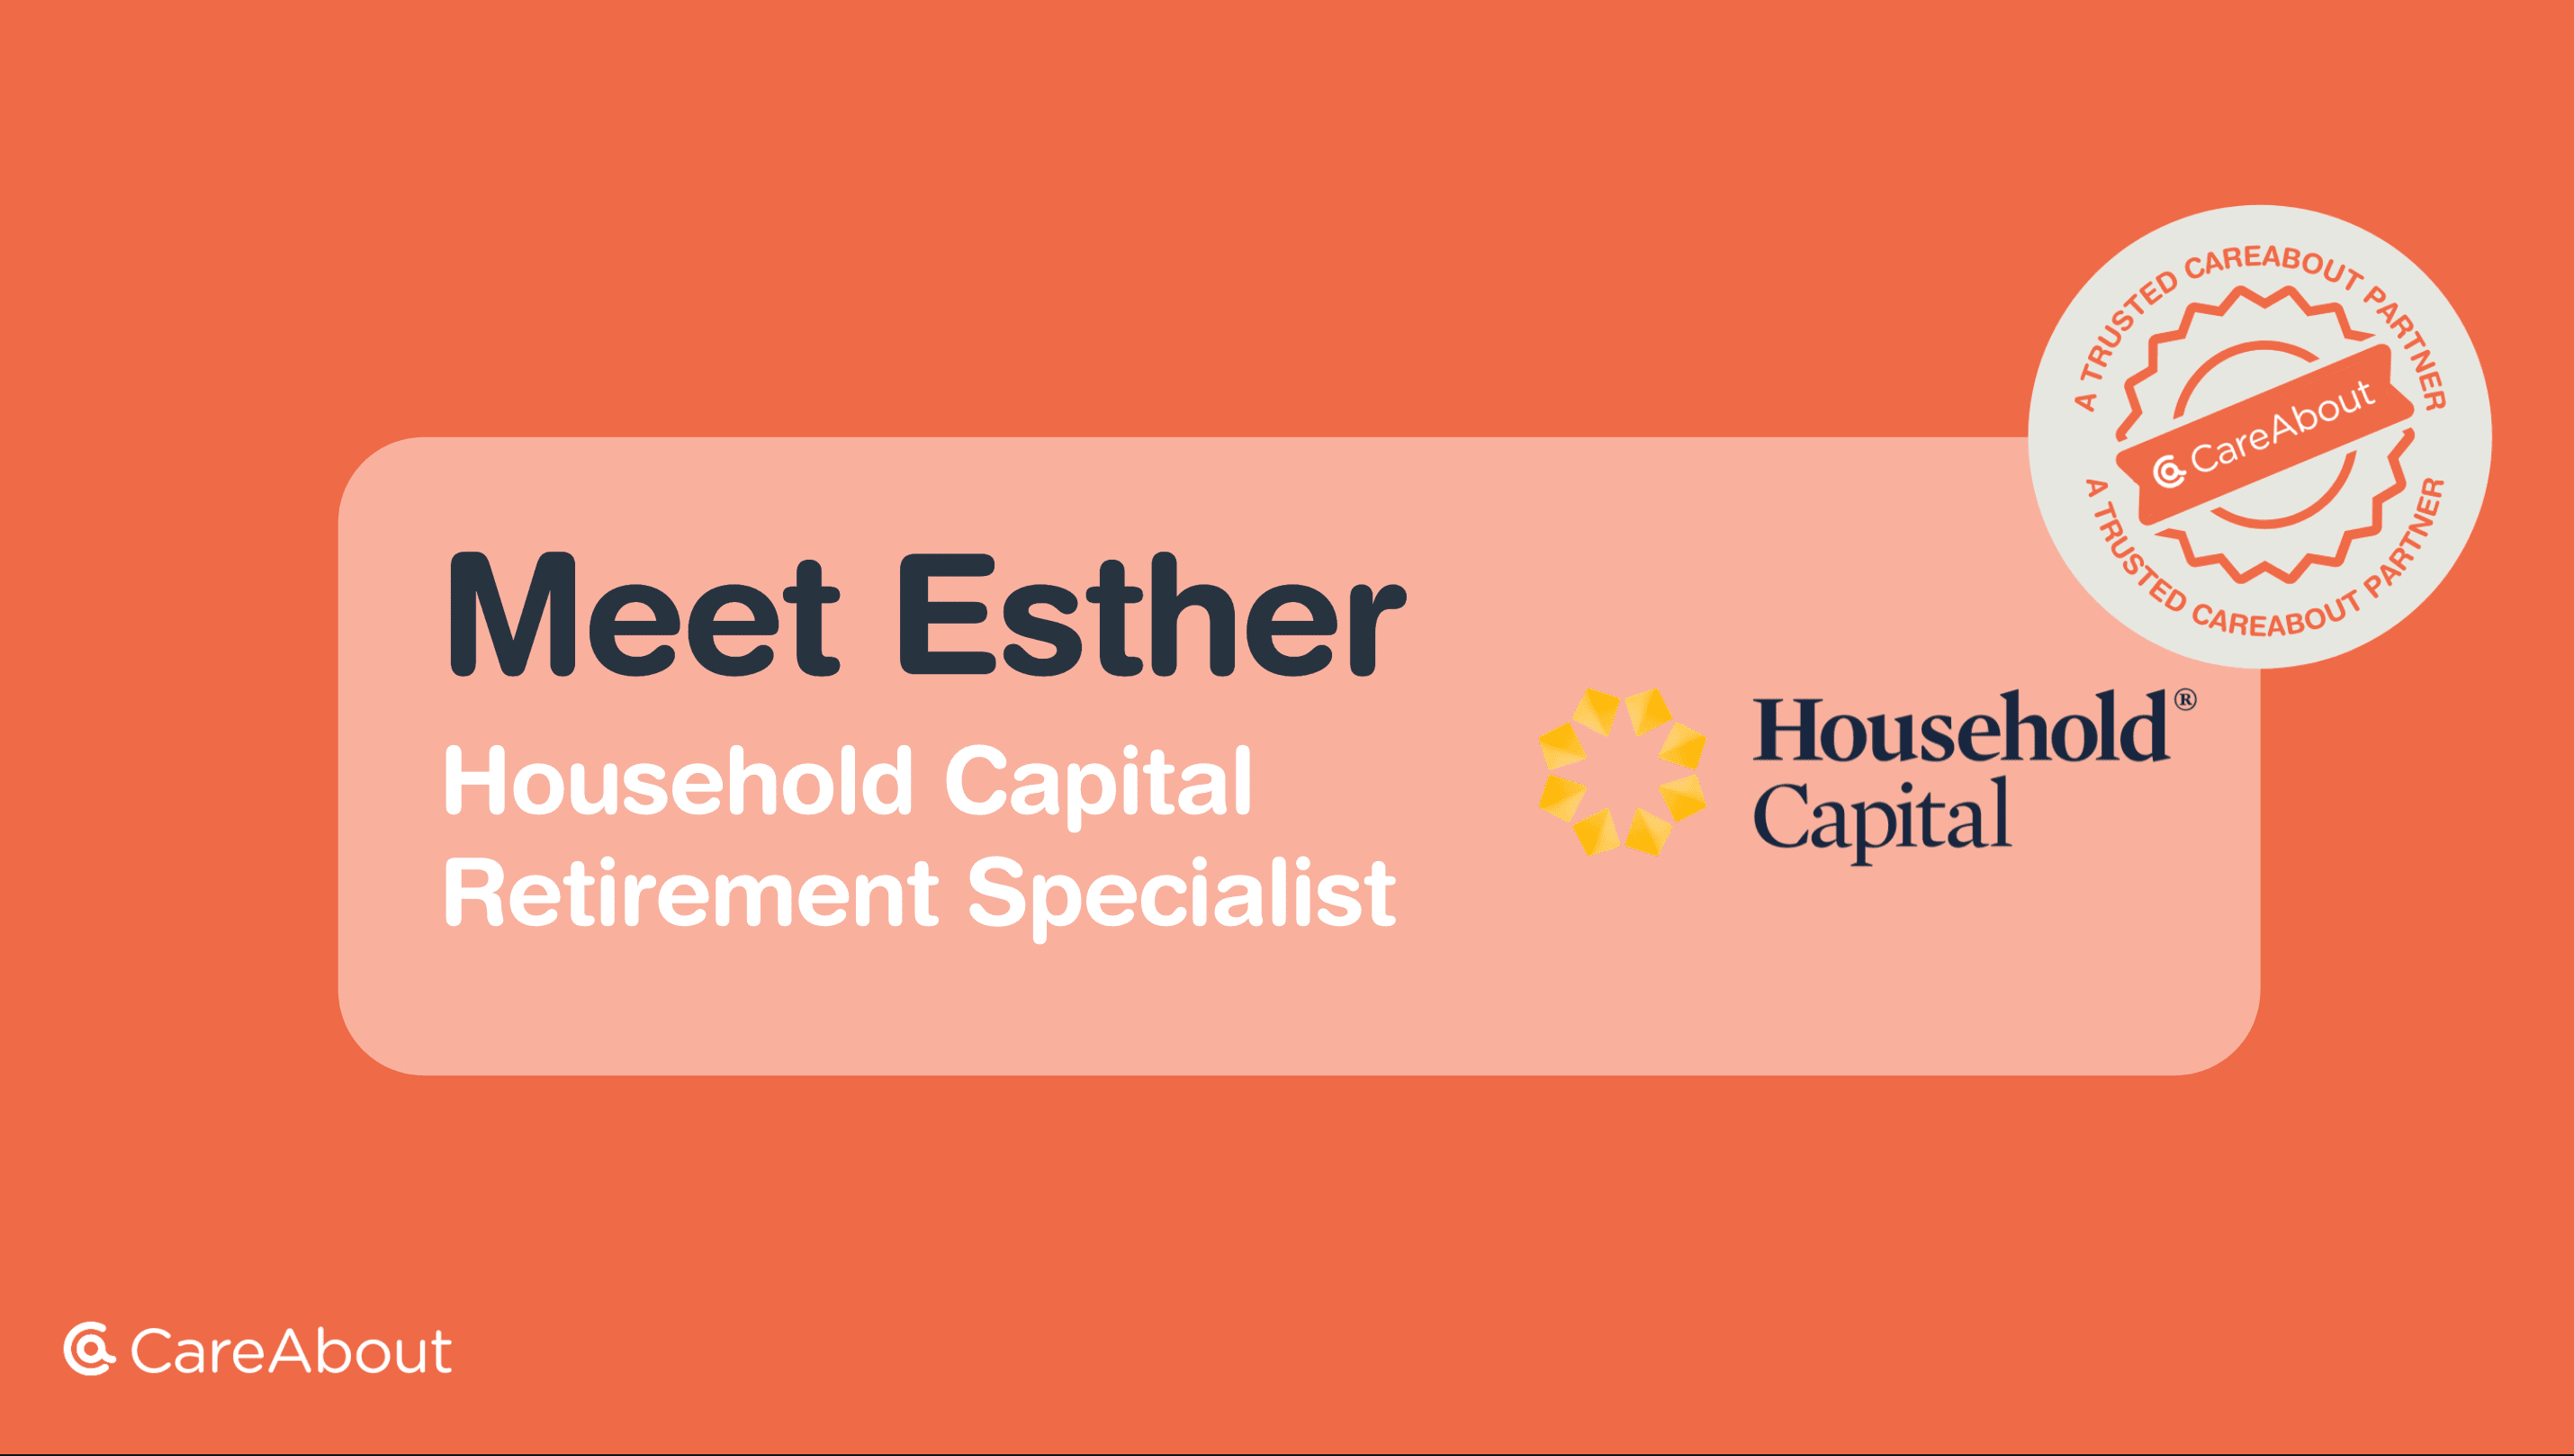 Household Capital retirement specialist